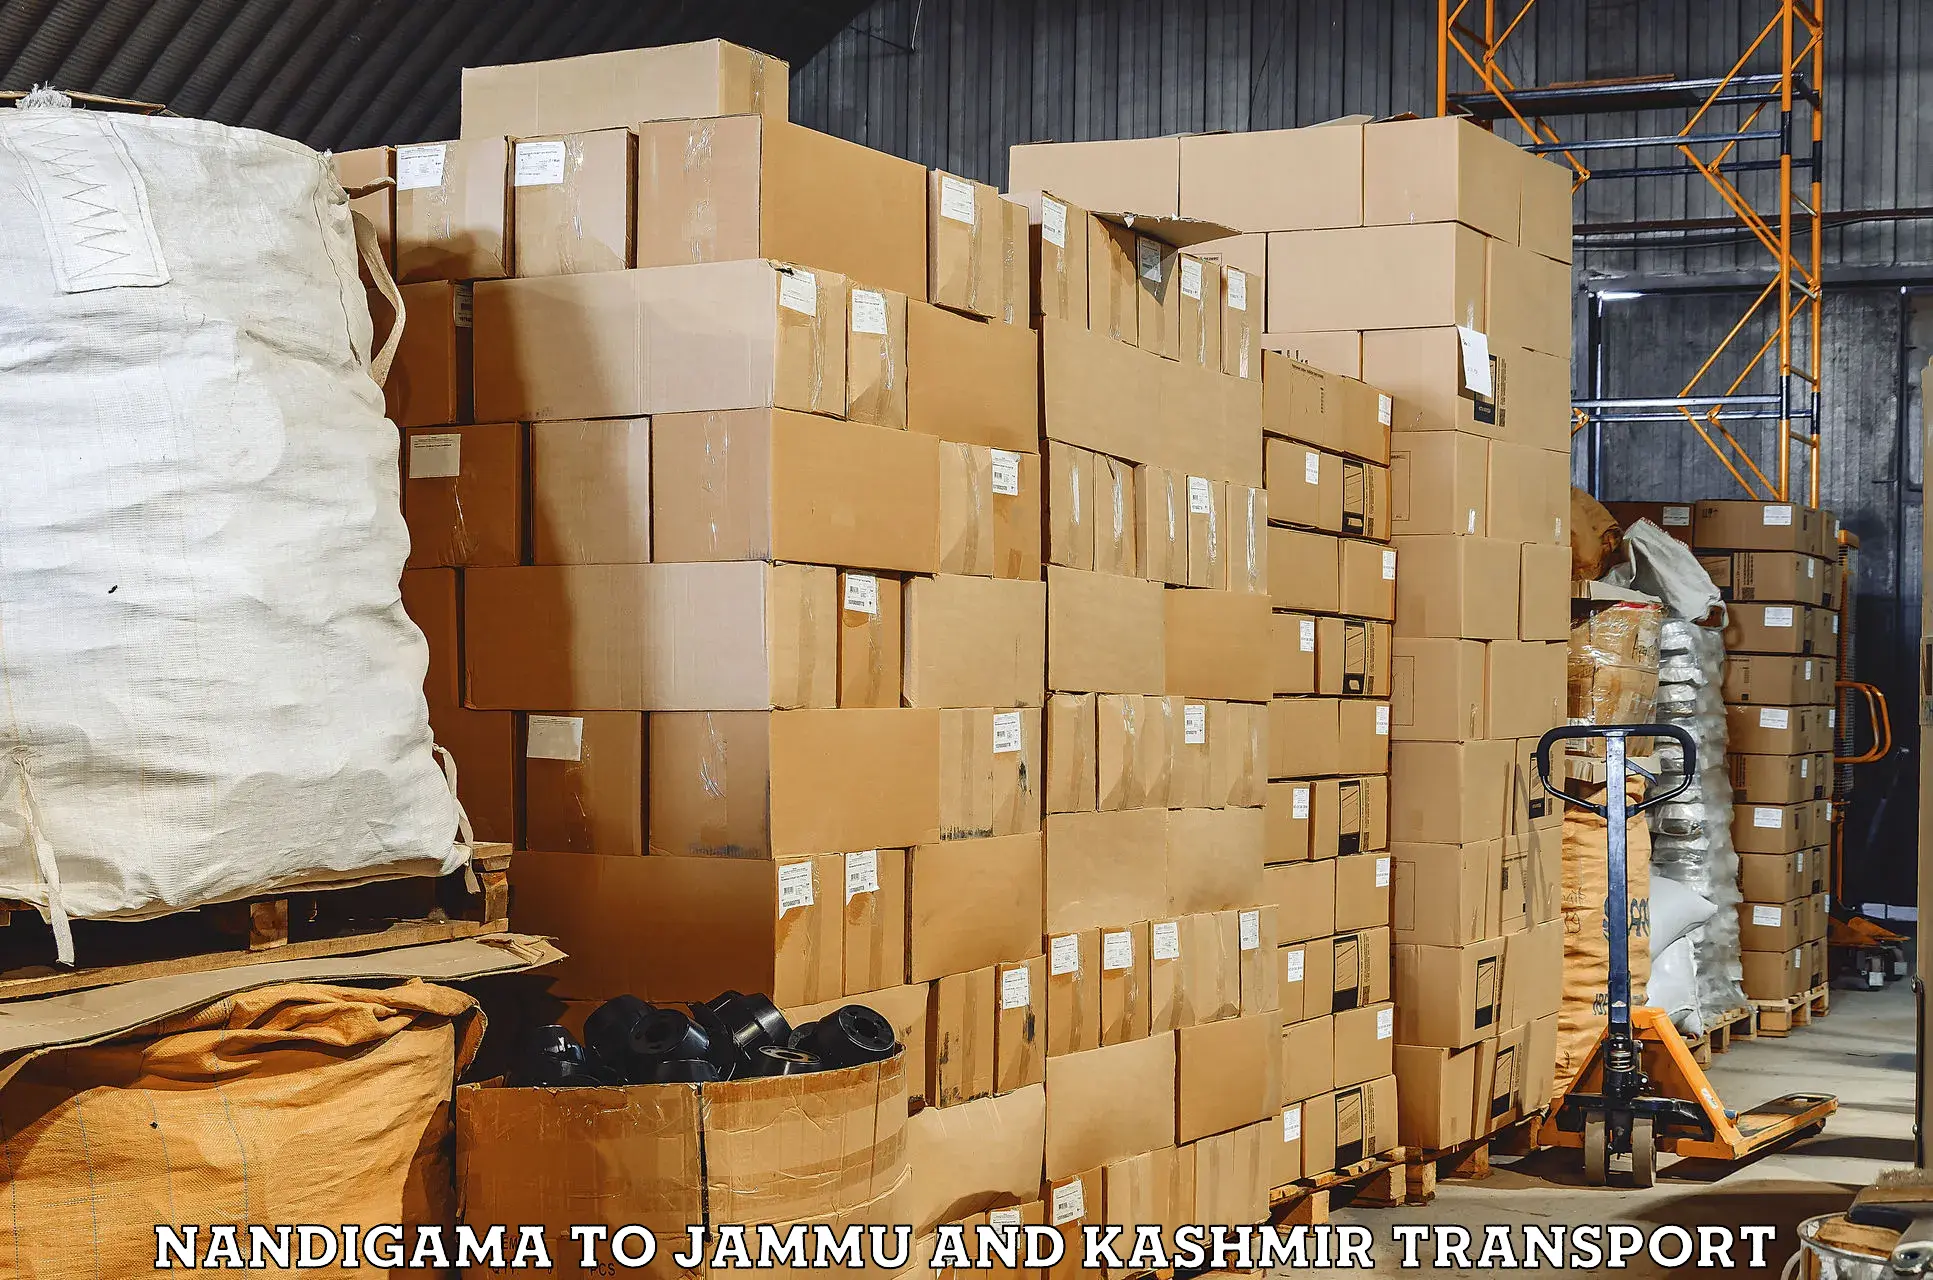 Part load transport service in India Nandigama to Baramulla